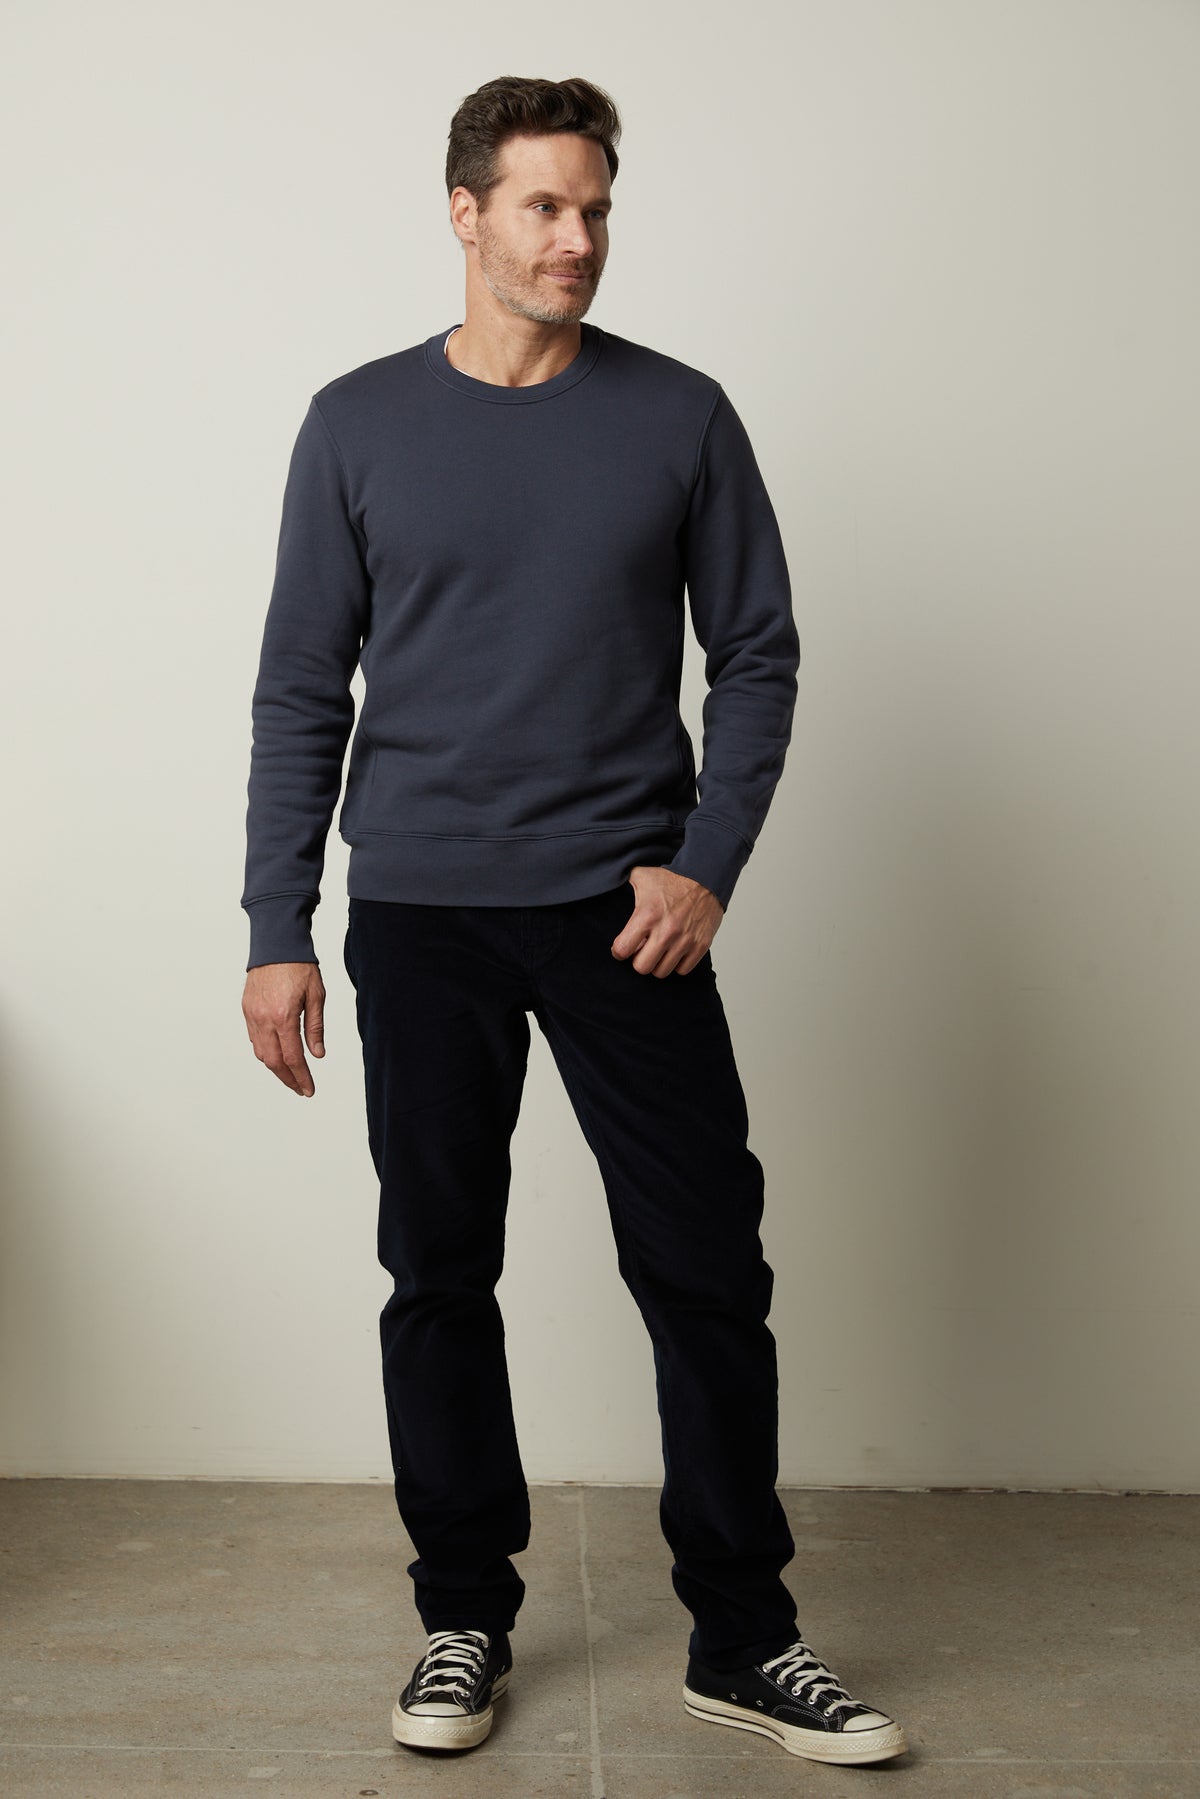 A man standing in a clean room wearing a Velvet by Graham & Spencer KING CREW NECK SWEATSHIRT and pants.-35472108093633